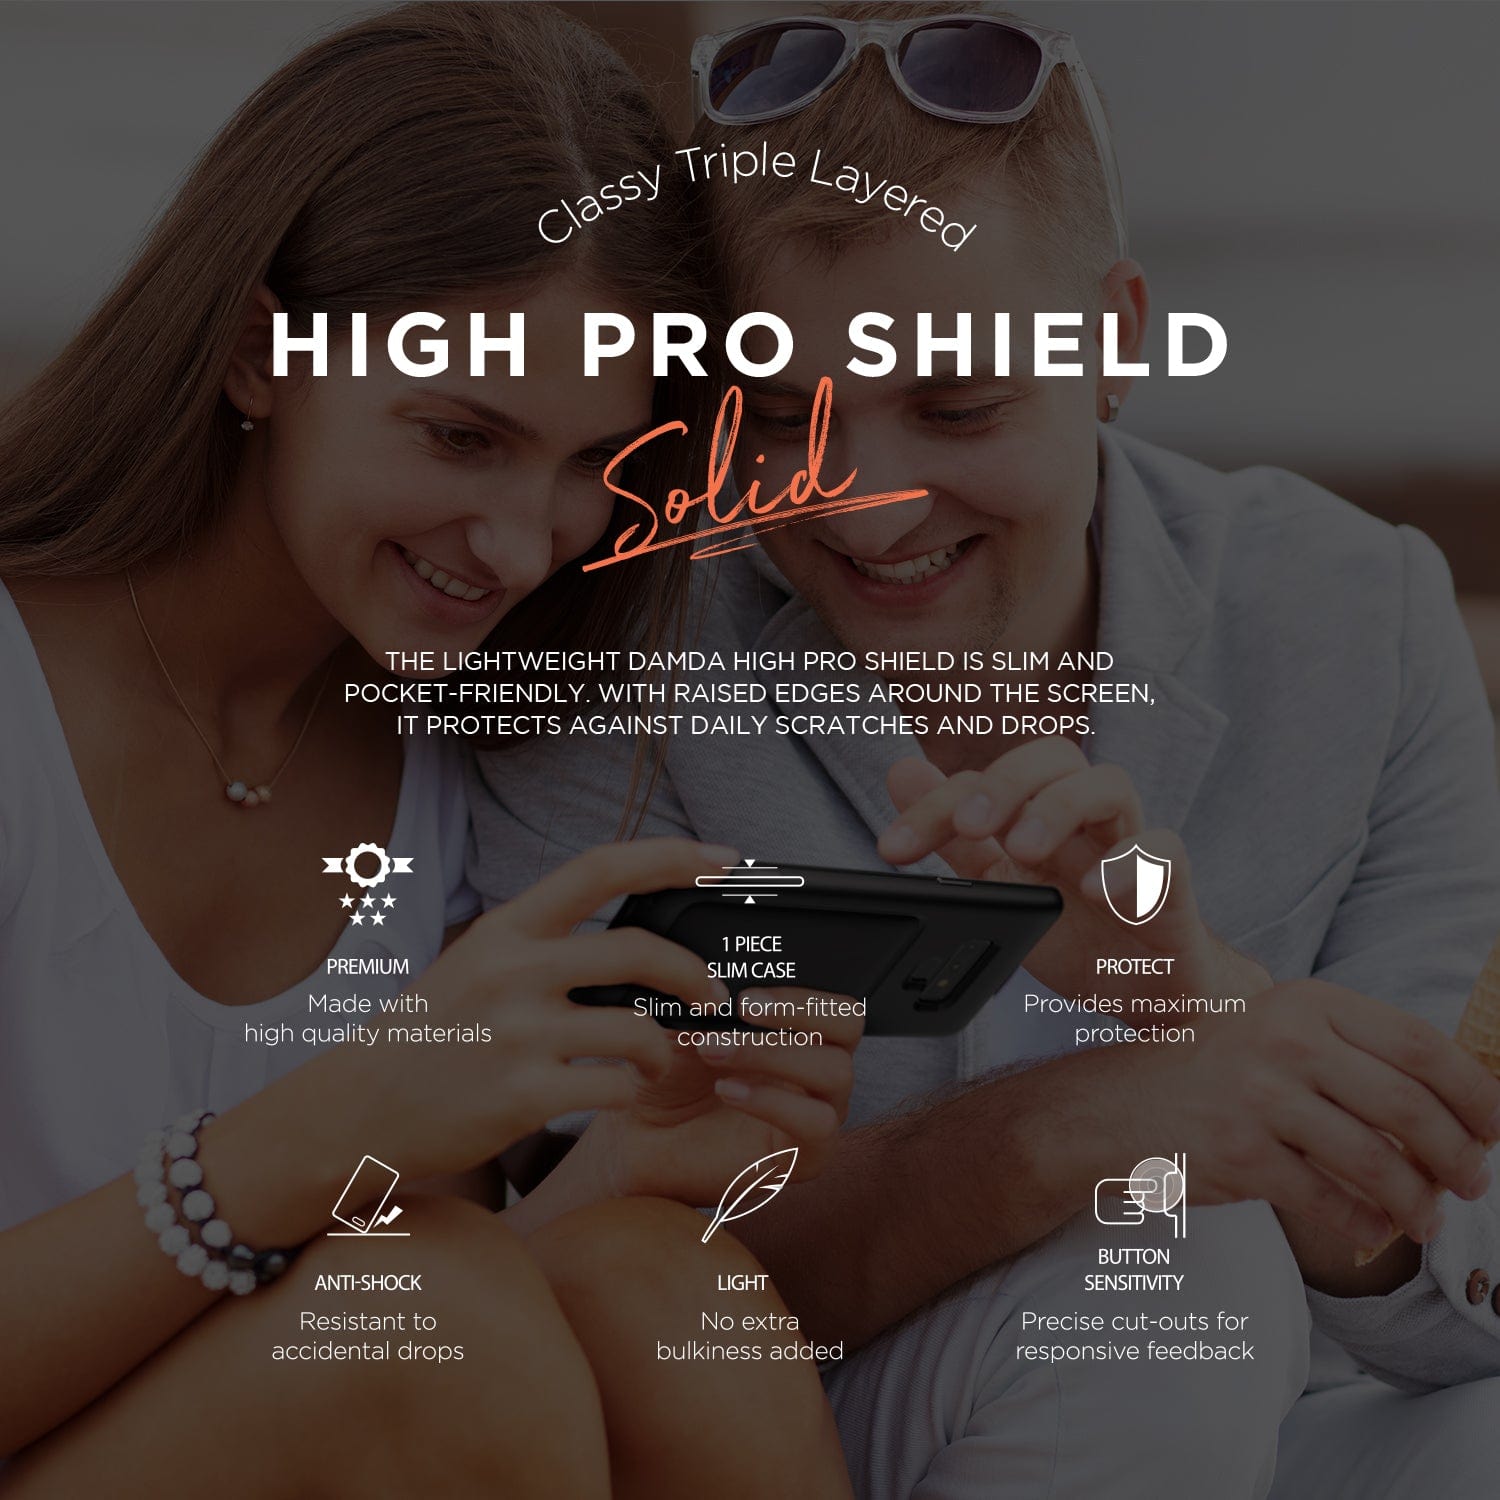  Introducing the High Pro Shield: crafted from premium, high-quality materials, this slim and form-fitted case offers maximum protection for your device. With its anti-shock resistance, it guards against accidental drops while providing precise cutouts for responsive feedback.